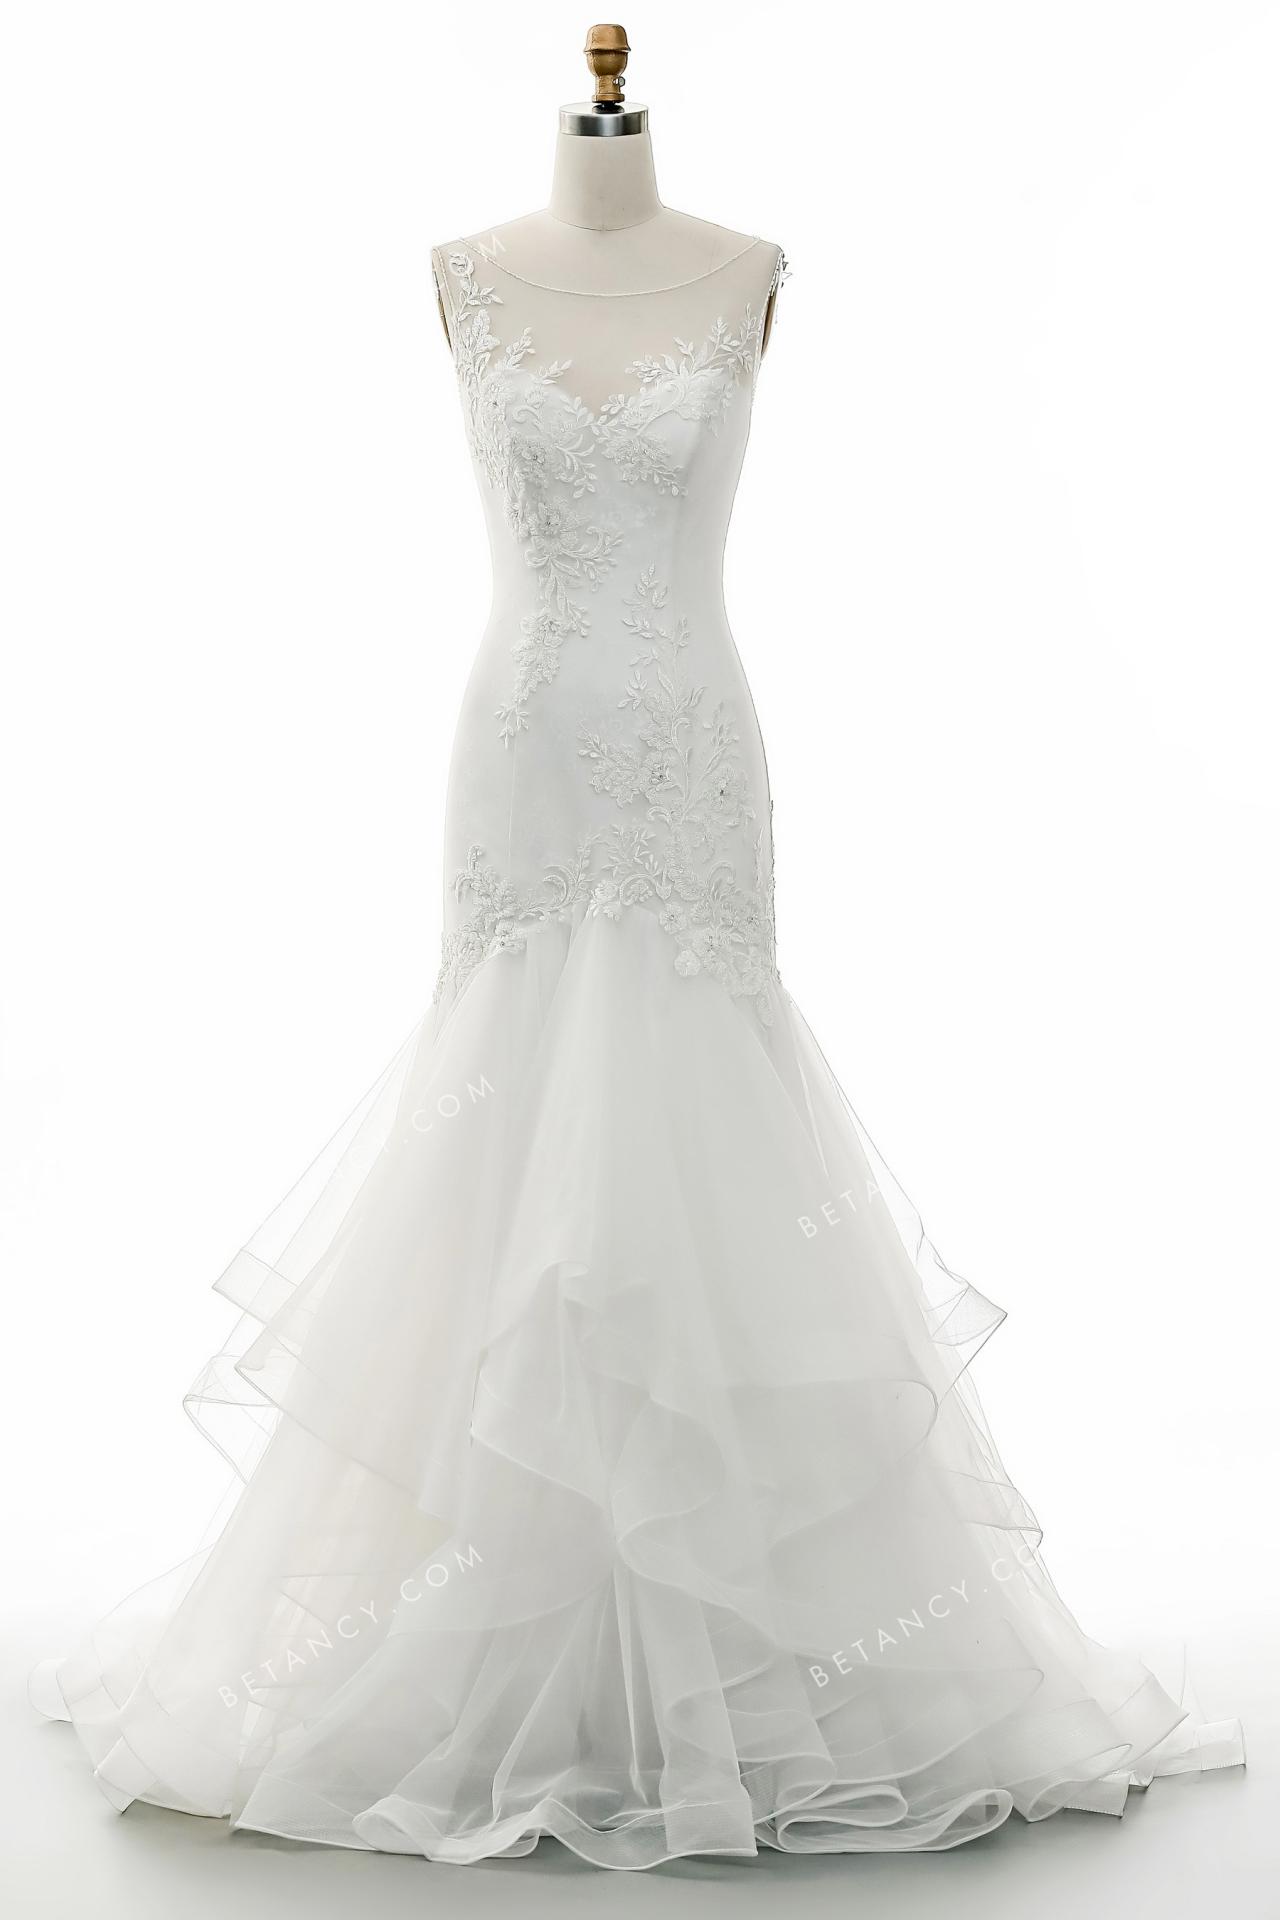 Illusion neck with floral beaded applique wedding dress 4